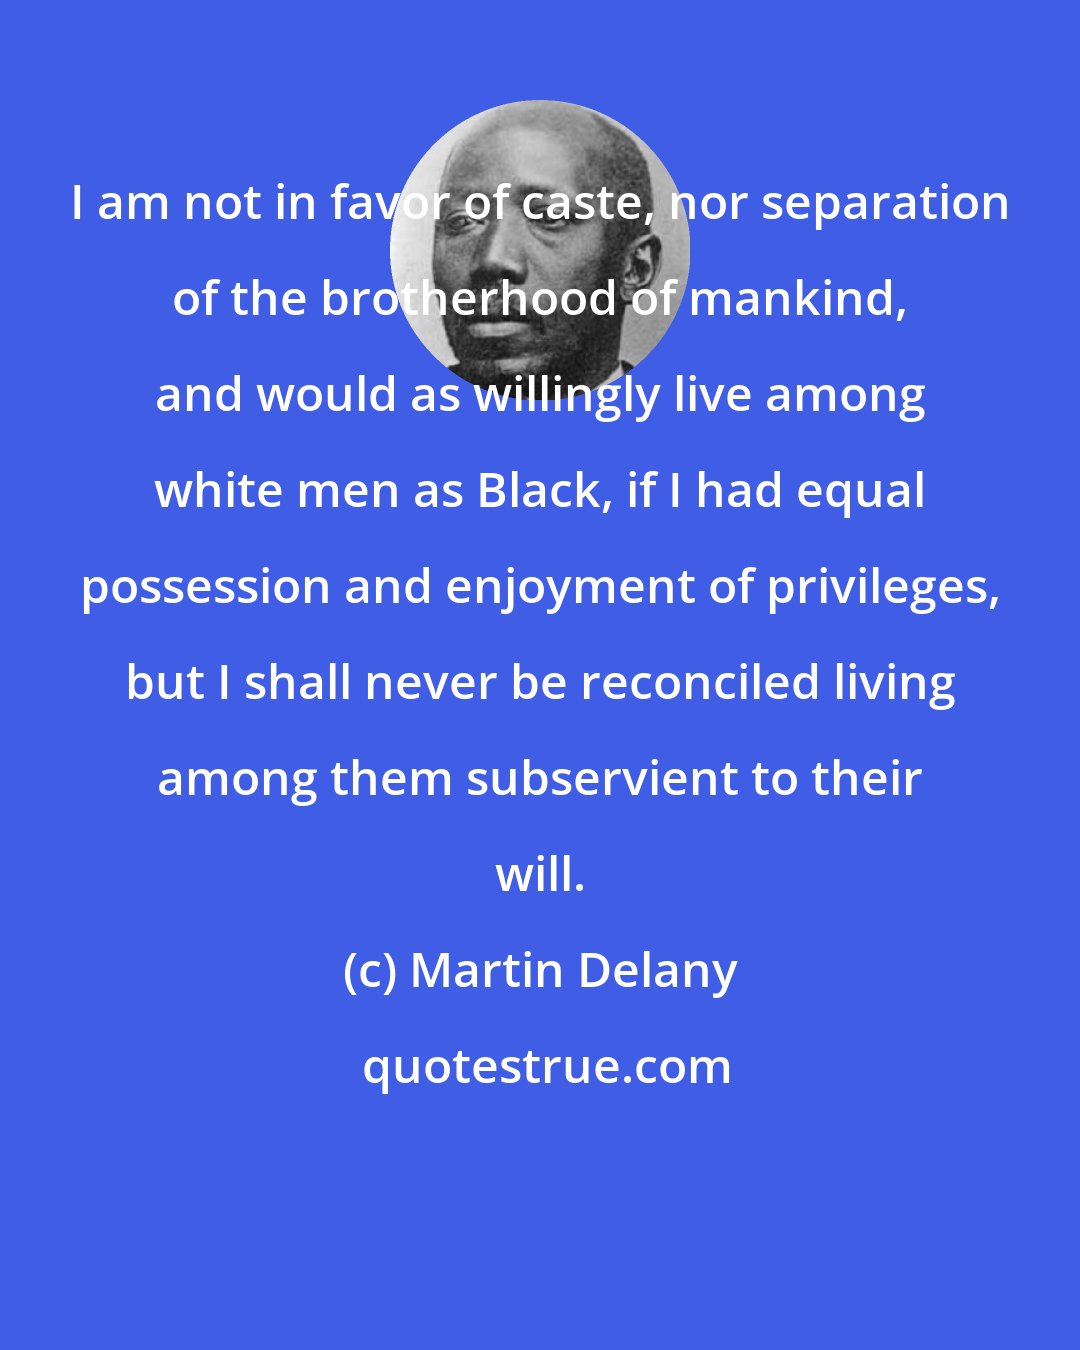 Martin Delany: I am not in favor of caste, nor separation of the brotherhood of mankind, and would as willingly live among white men as Black, if I had equal possession and enjoyment of privileges, but I shall never be reconciled living among them subservient to their will.